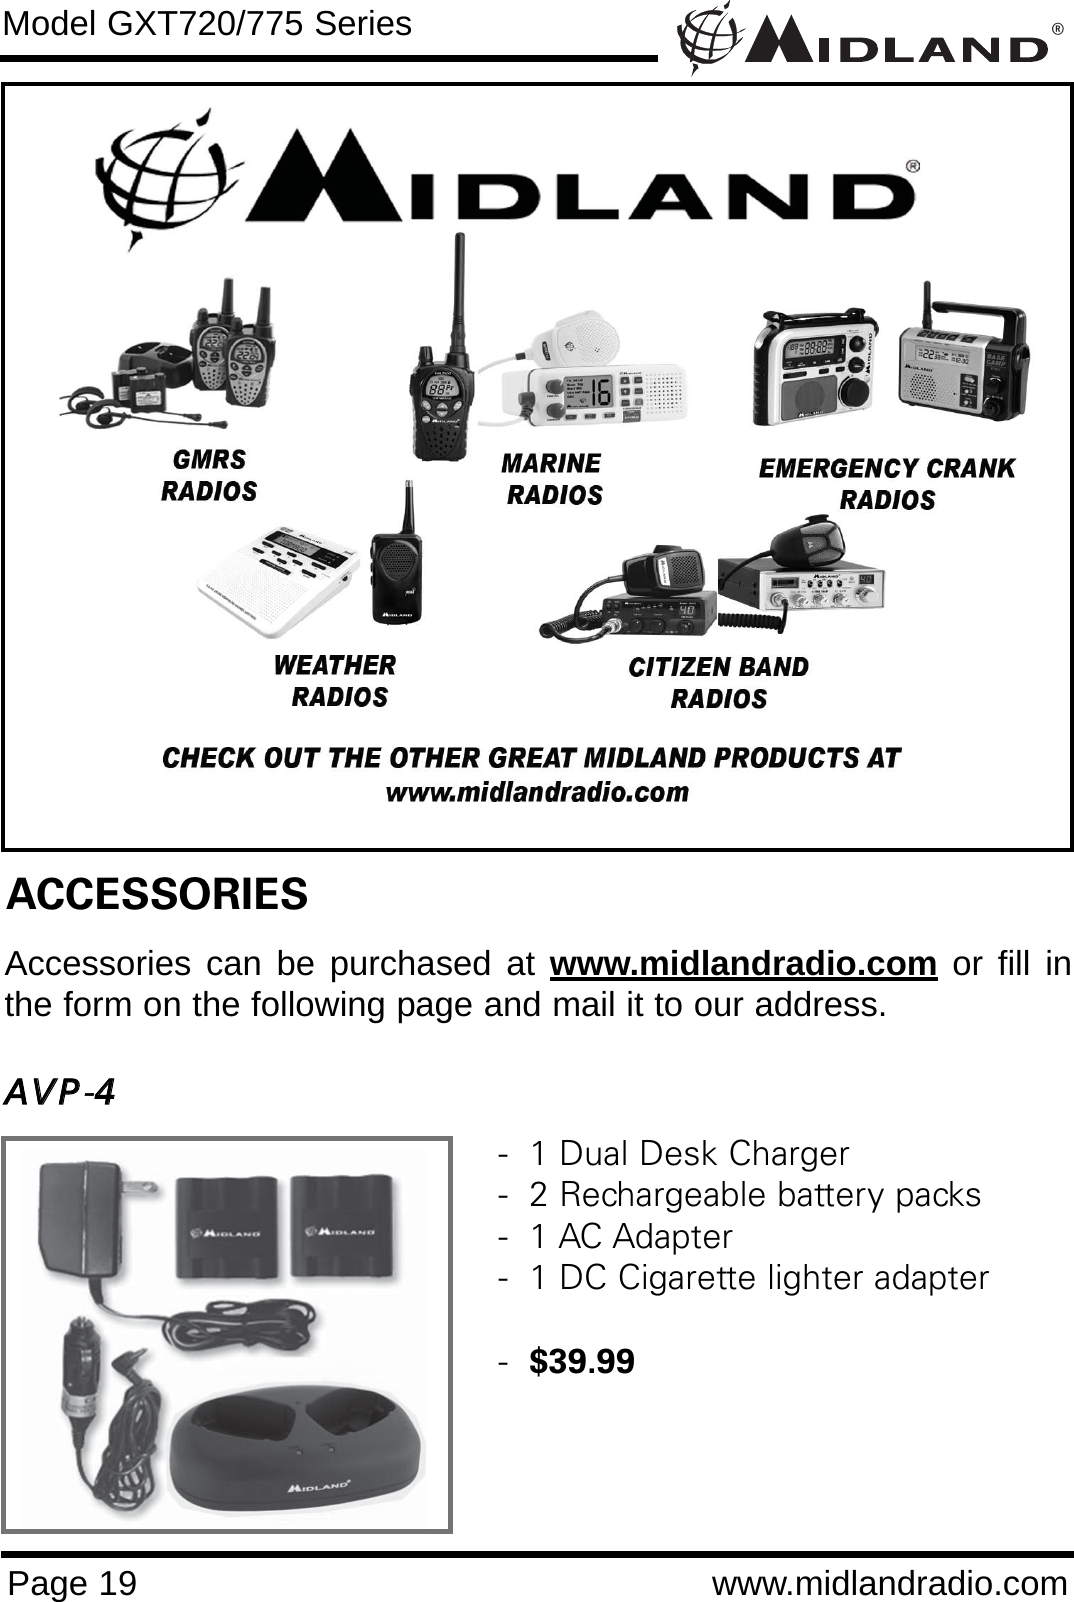 ®Page 19 www.midlandradio.comModel GXT720/775 SeriesACCESSORIESAccessories can be purchased at www.midlandradio.com or fill inthe form on the following page and mail it to our address.AAVVPP-44-  1 Dual Desk Charger-  2 Rechargeable battery packs-  1 AC Adapter-  1 DC Cigarette lighter adapter-  $39.99